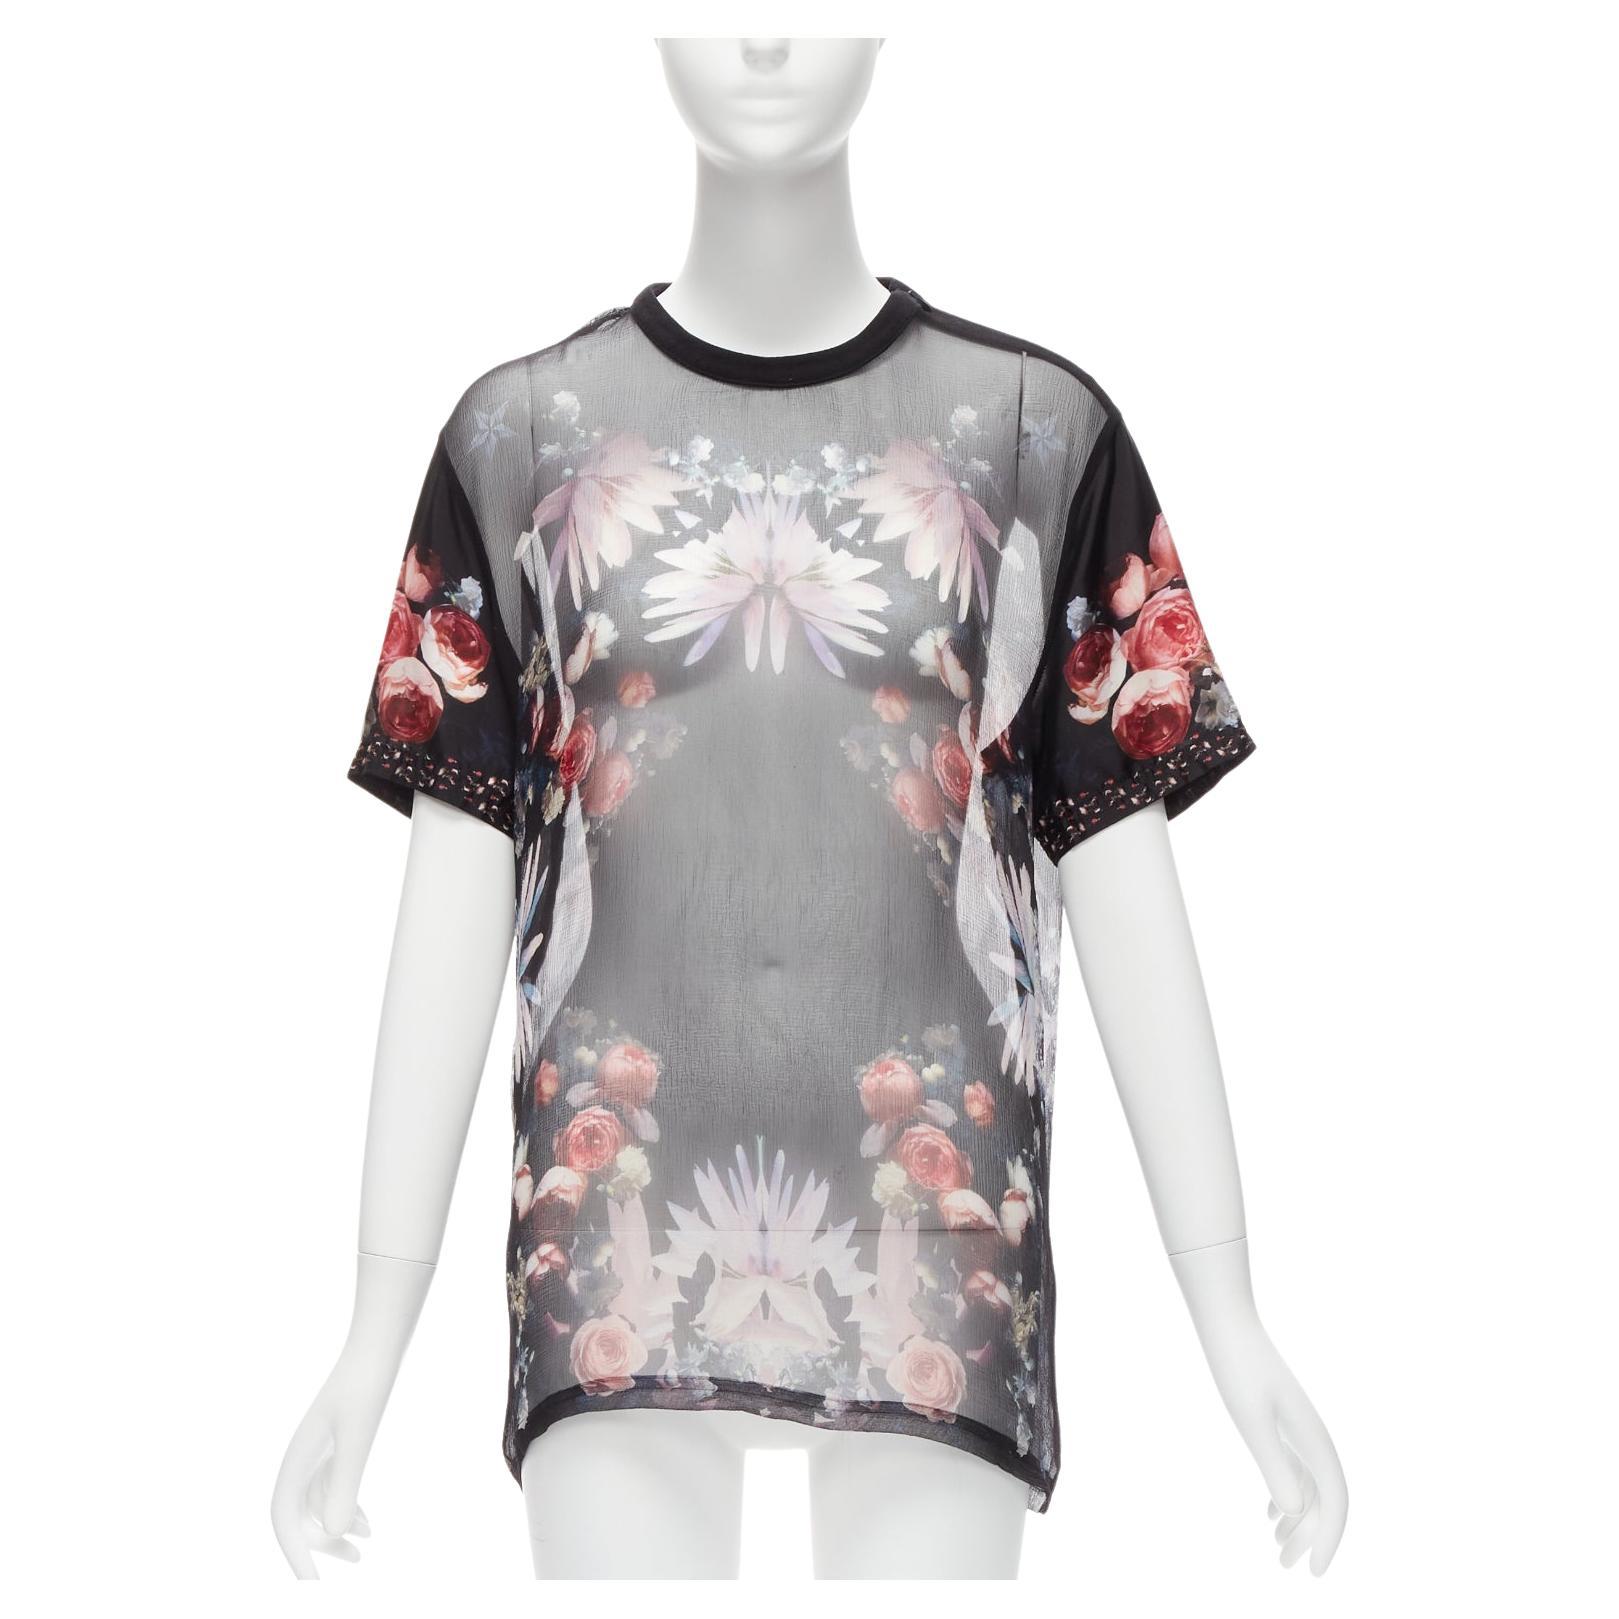 GIVENCHY RICCARDO TISCI red black floral sheer romantic goth tshirt FR34 XS For Sale